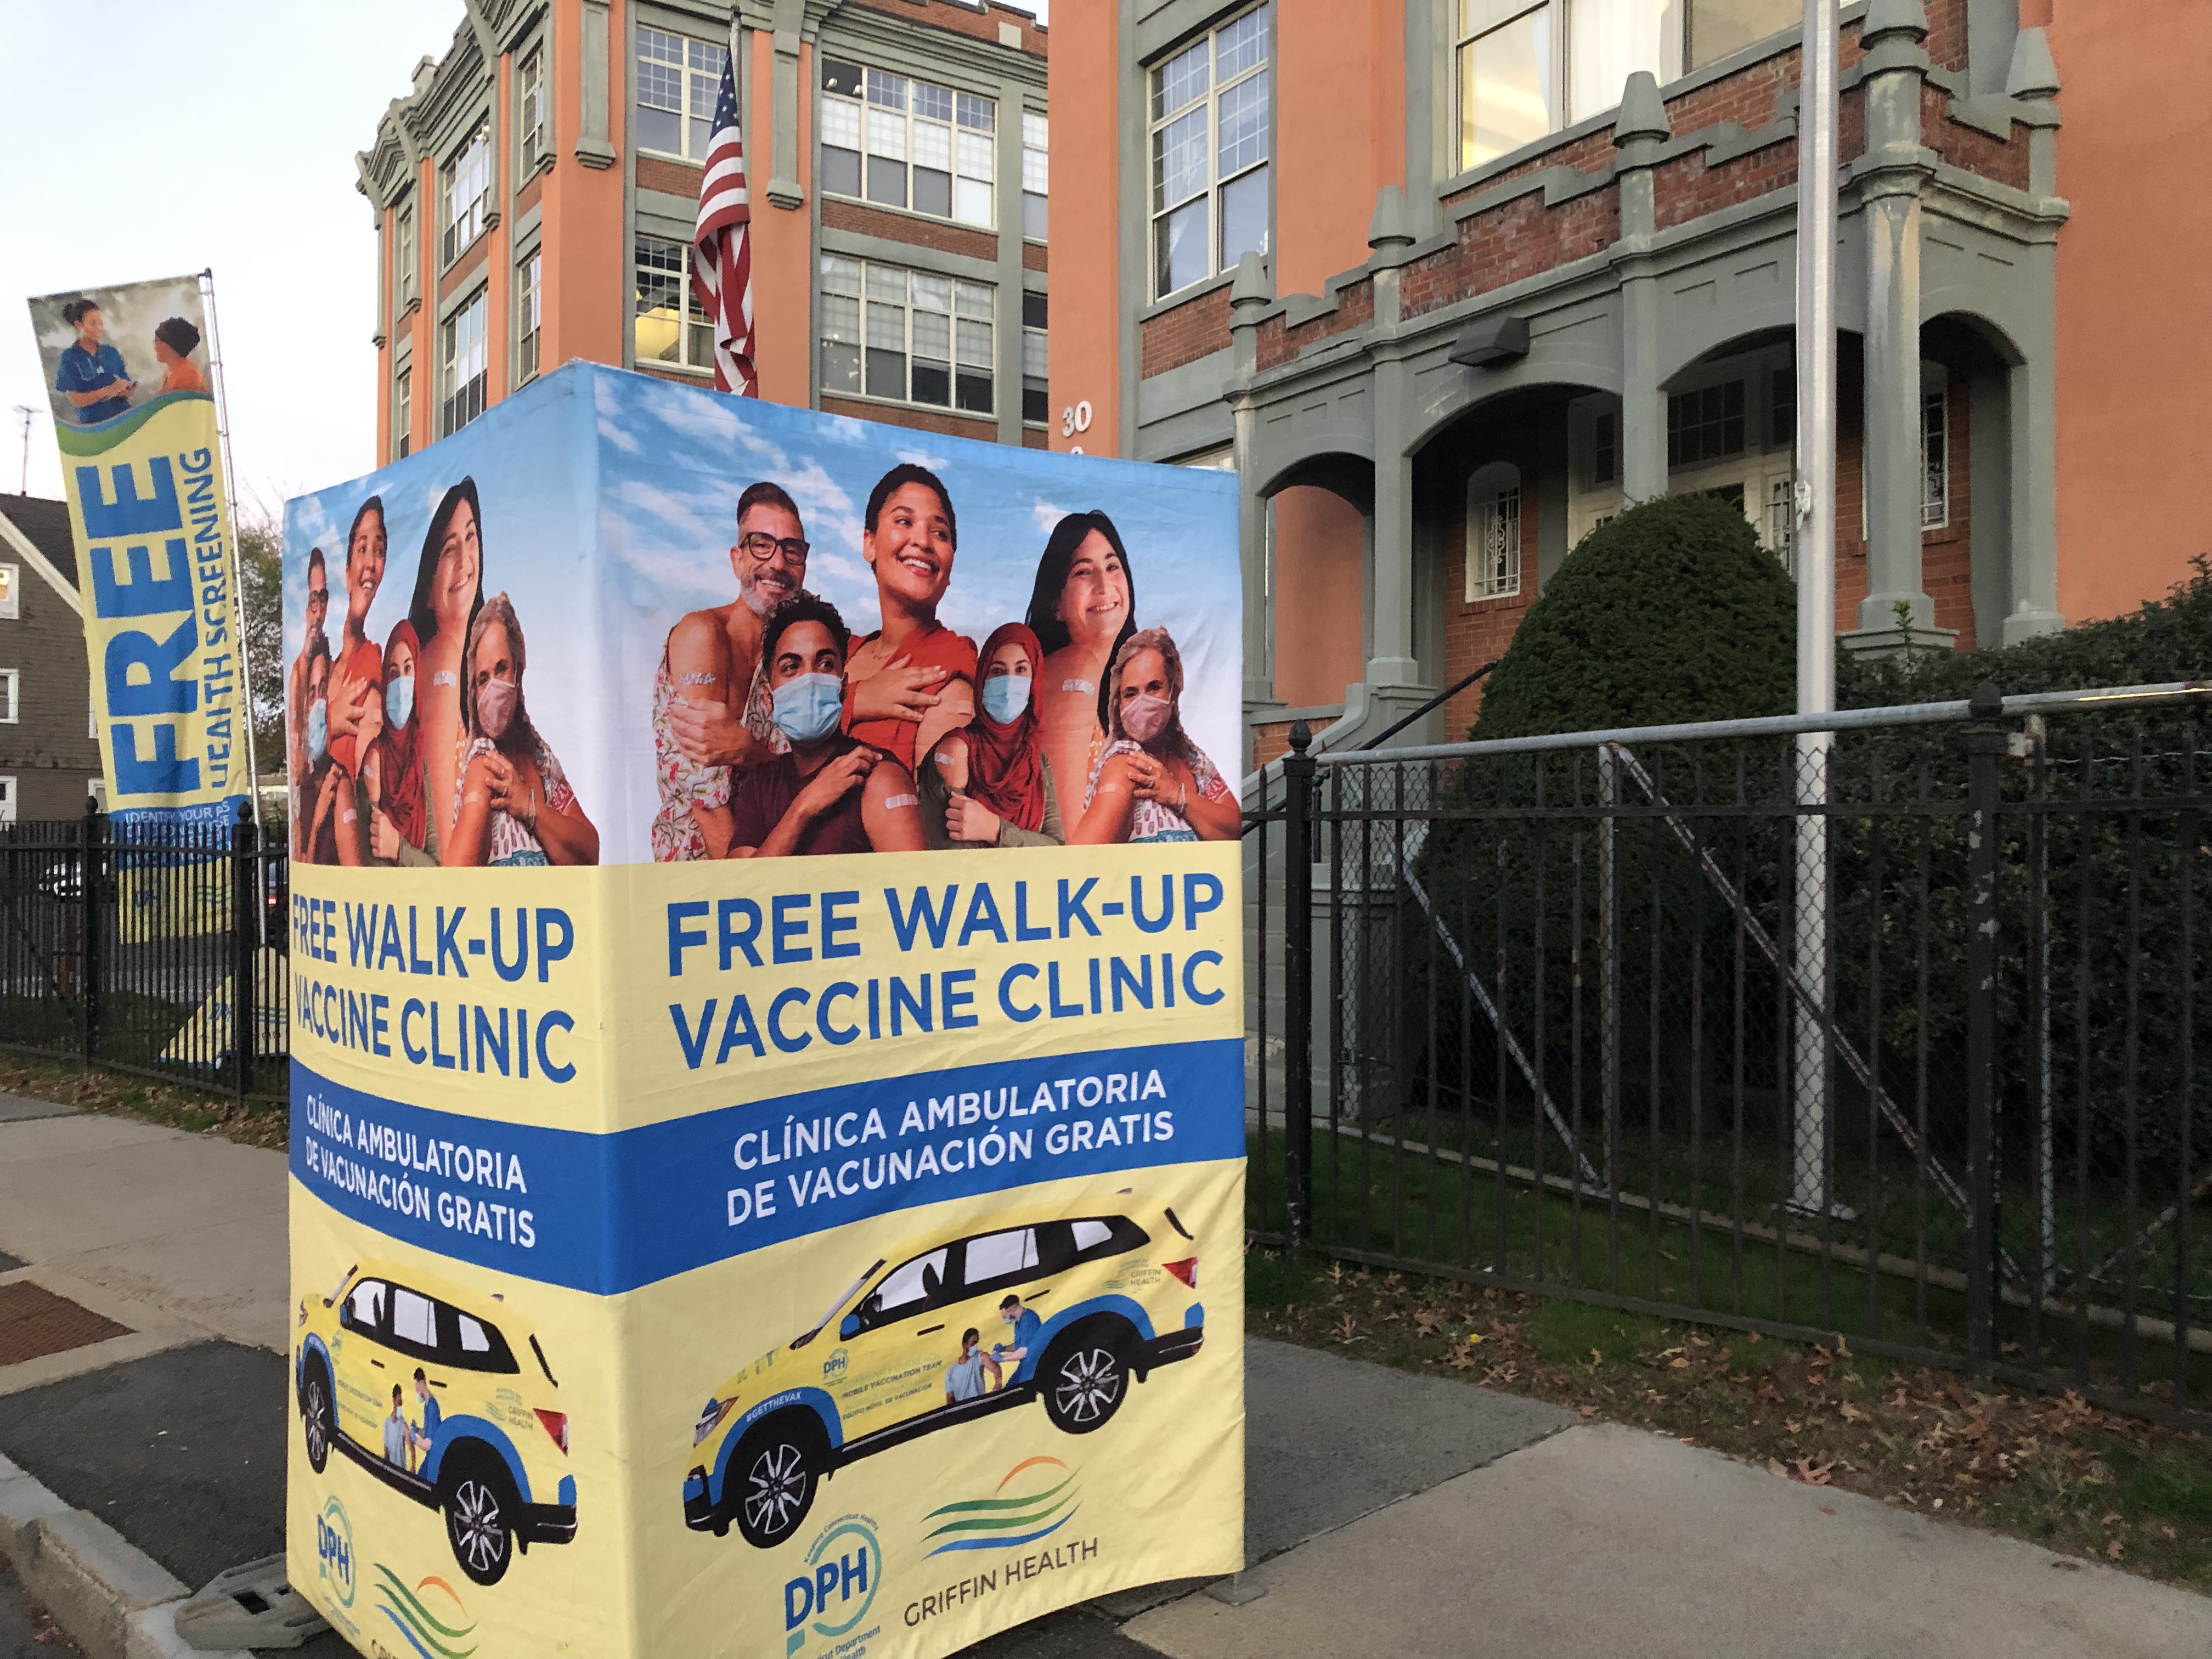 Image shows a sign on the sidewalk for a free walk-up vaccine clinic, with the text in both English and Spanish.